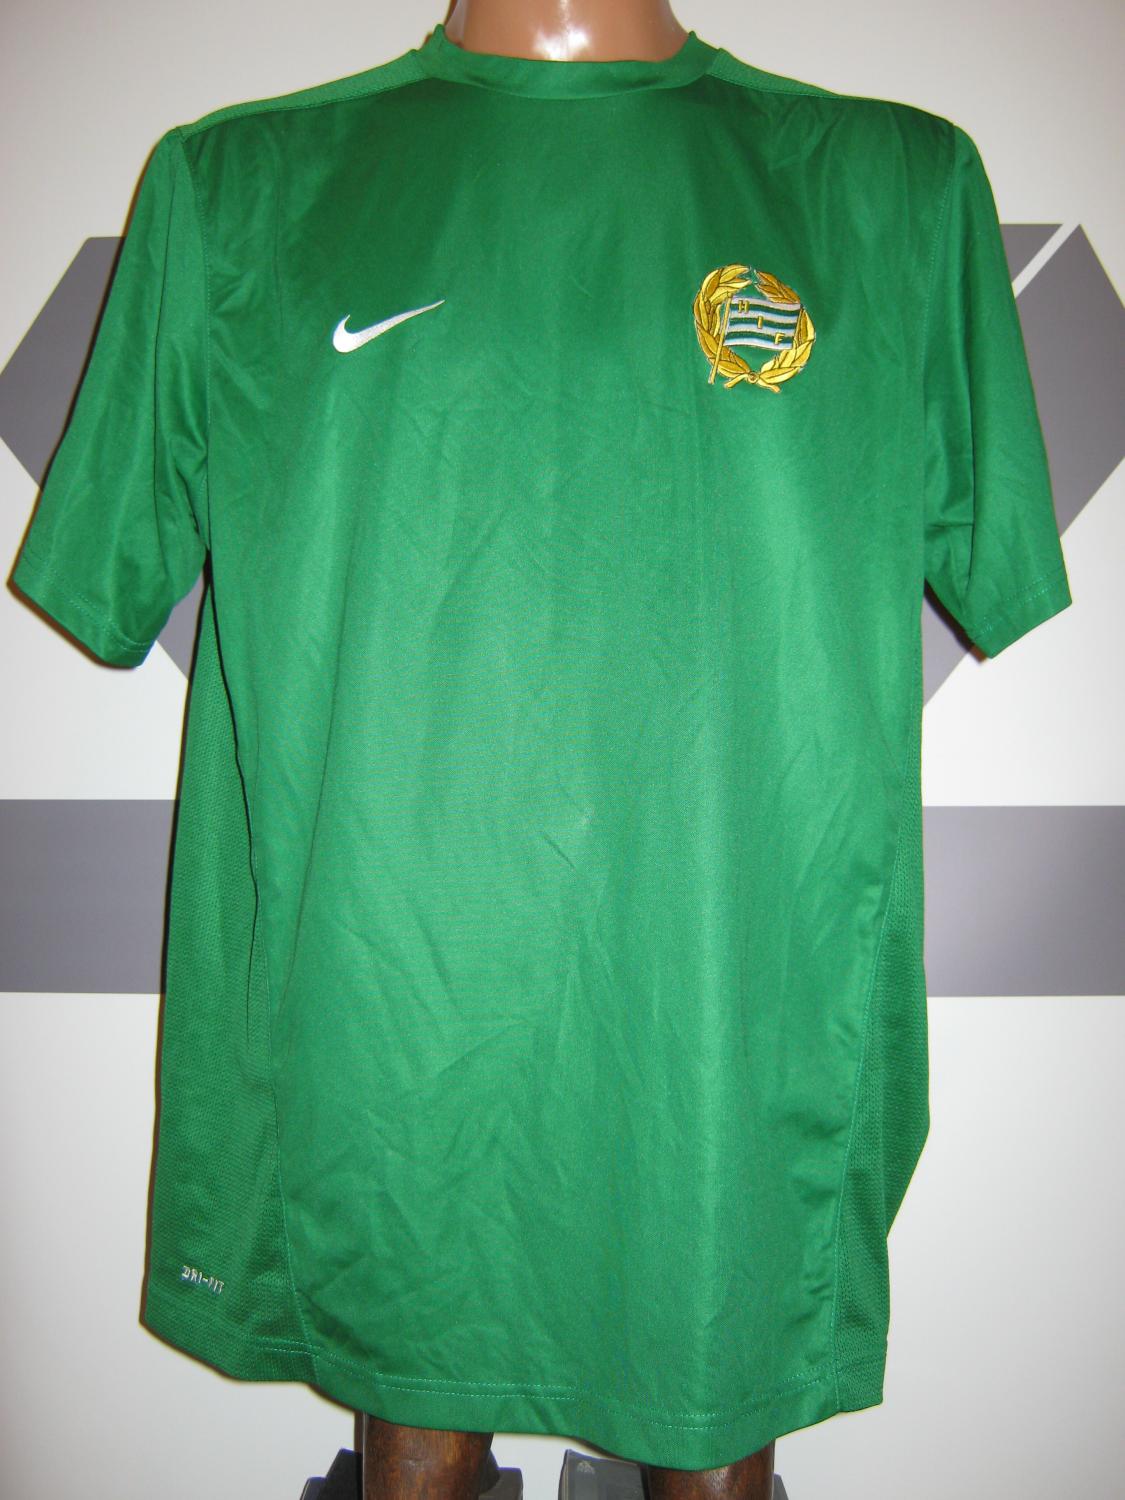 maillot hammarby if domicile 2009 pas cher